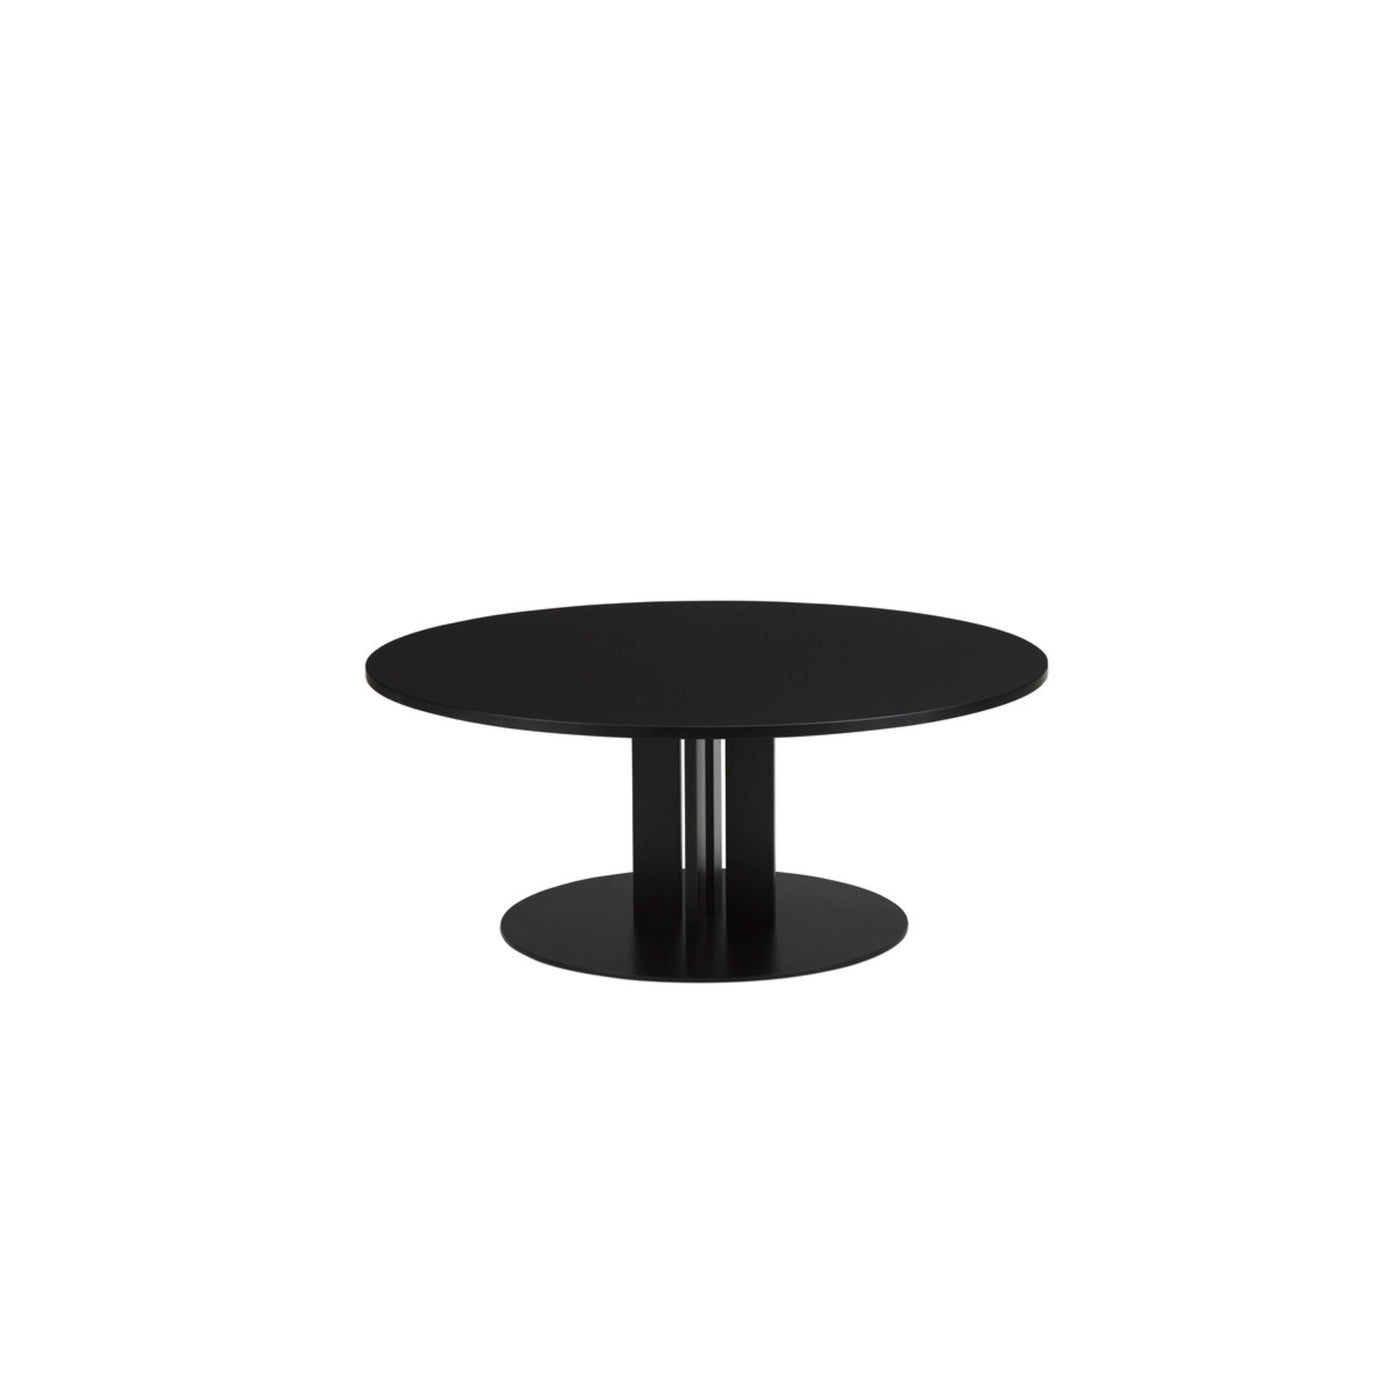 Normann Copenhagen Scala Coffee Table at someday designs. #colour_black-stained-oak